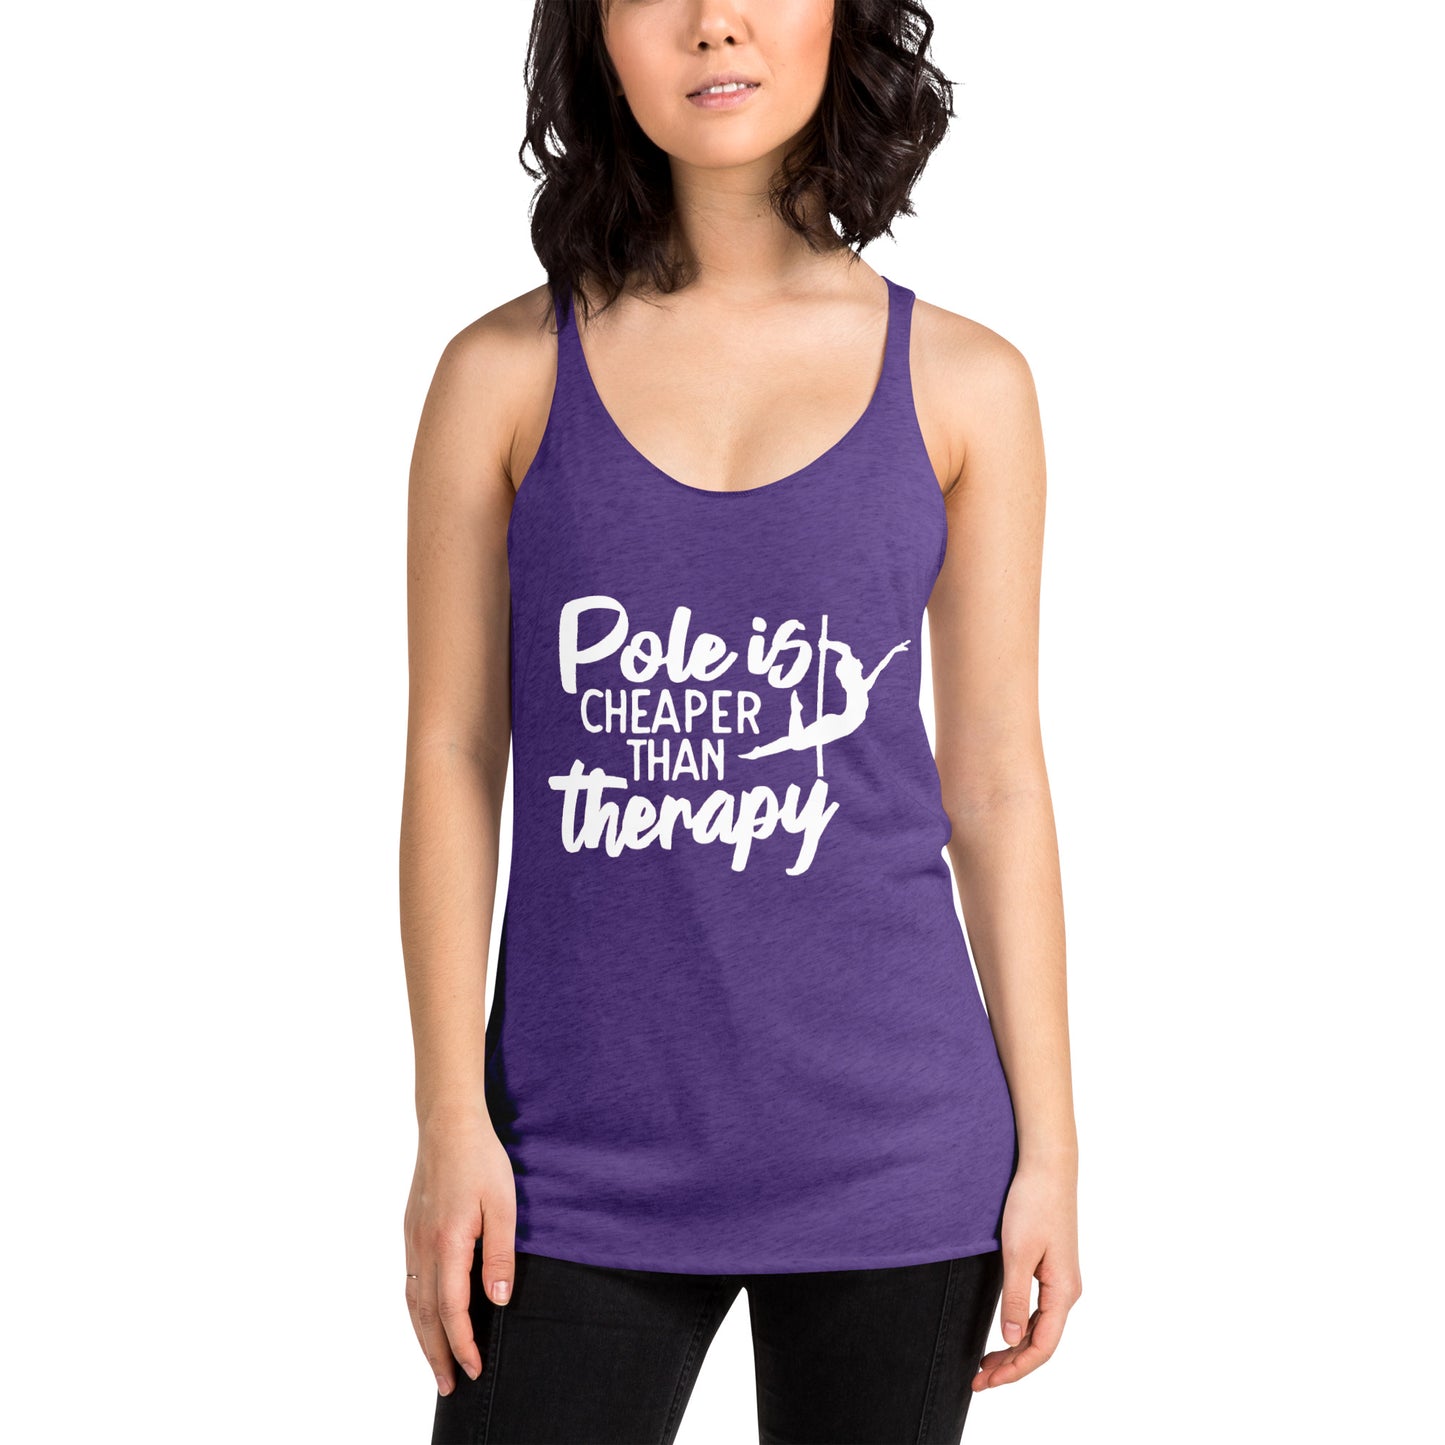 Pole Is Cheaper Than Therapy - Women's Racerback Tank